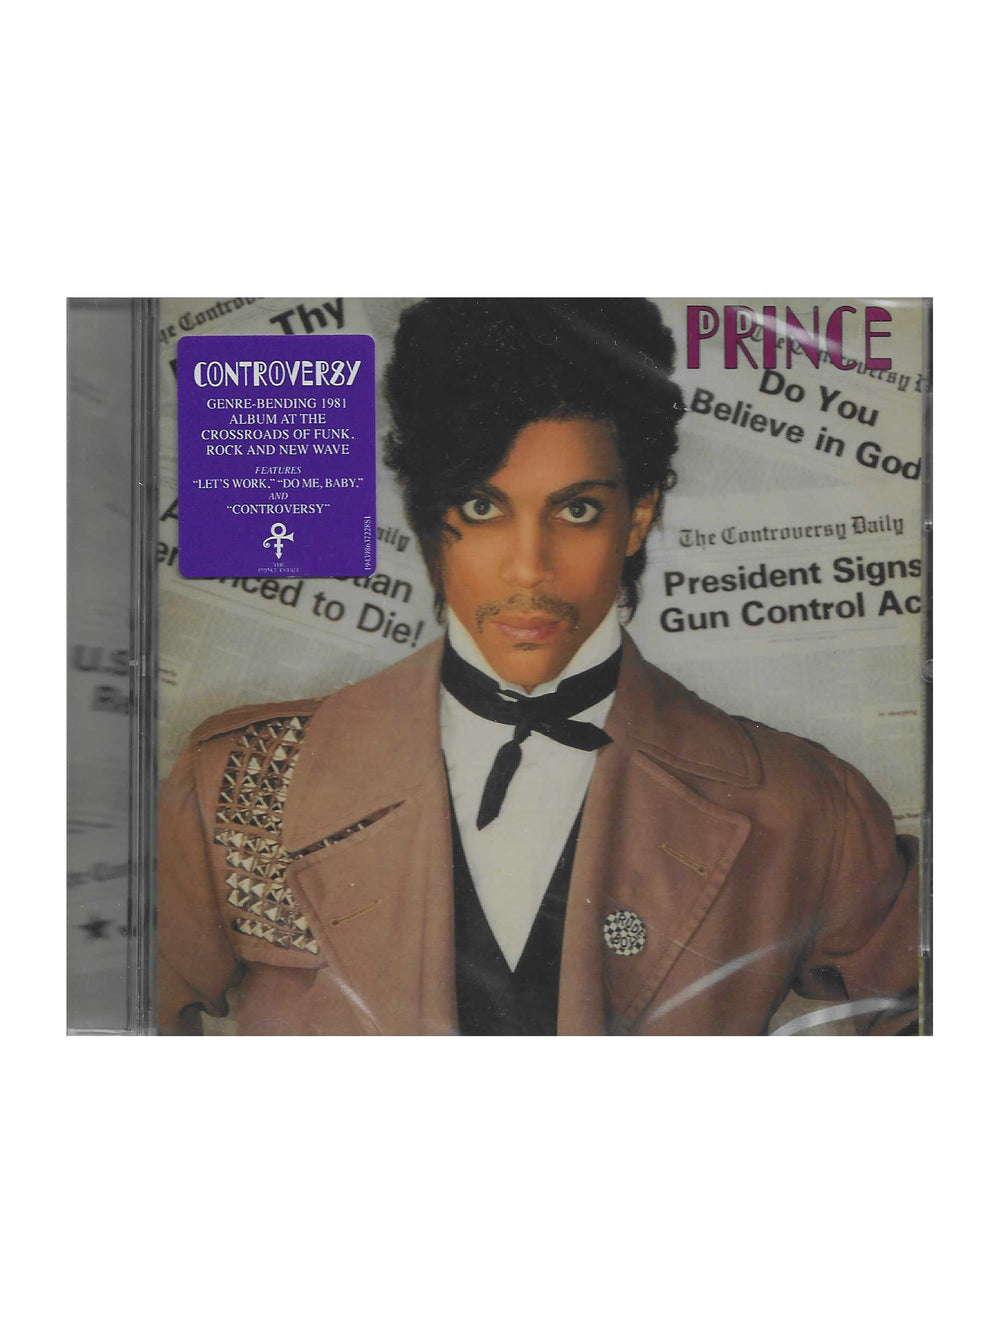 Prince – Controversy CD Compact Disc Reissue 2022 Sony Legacy NPG Records